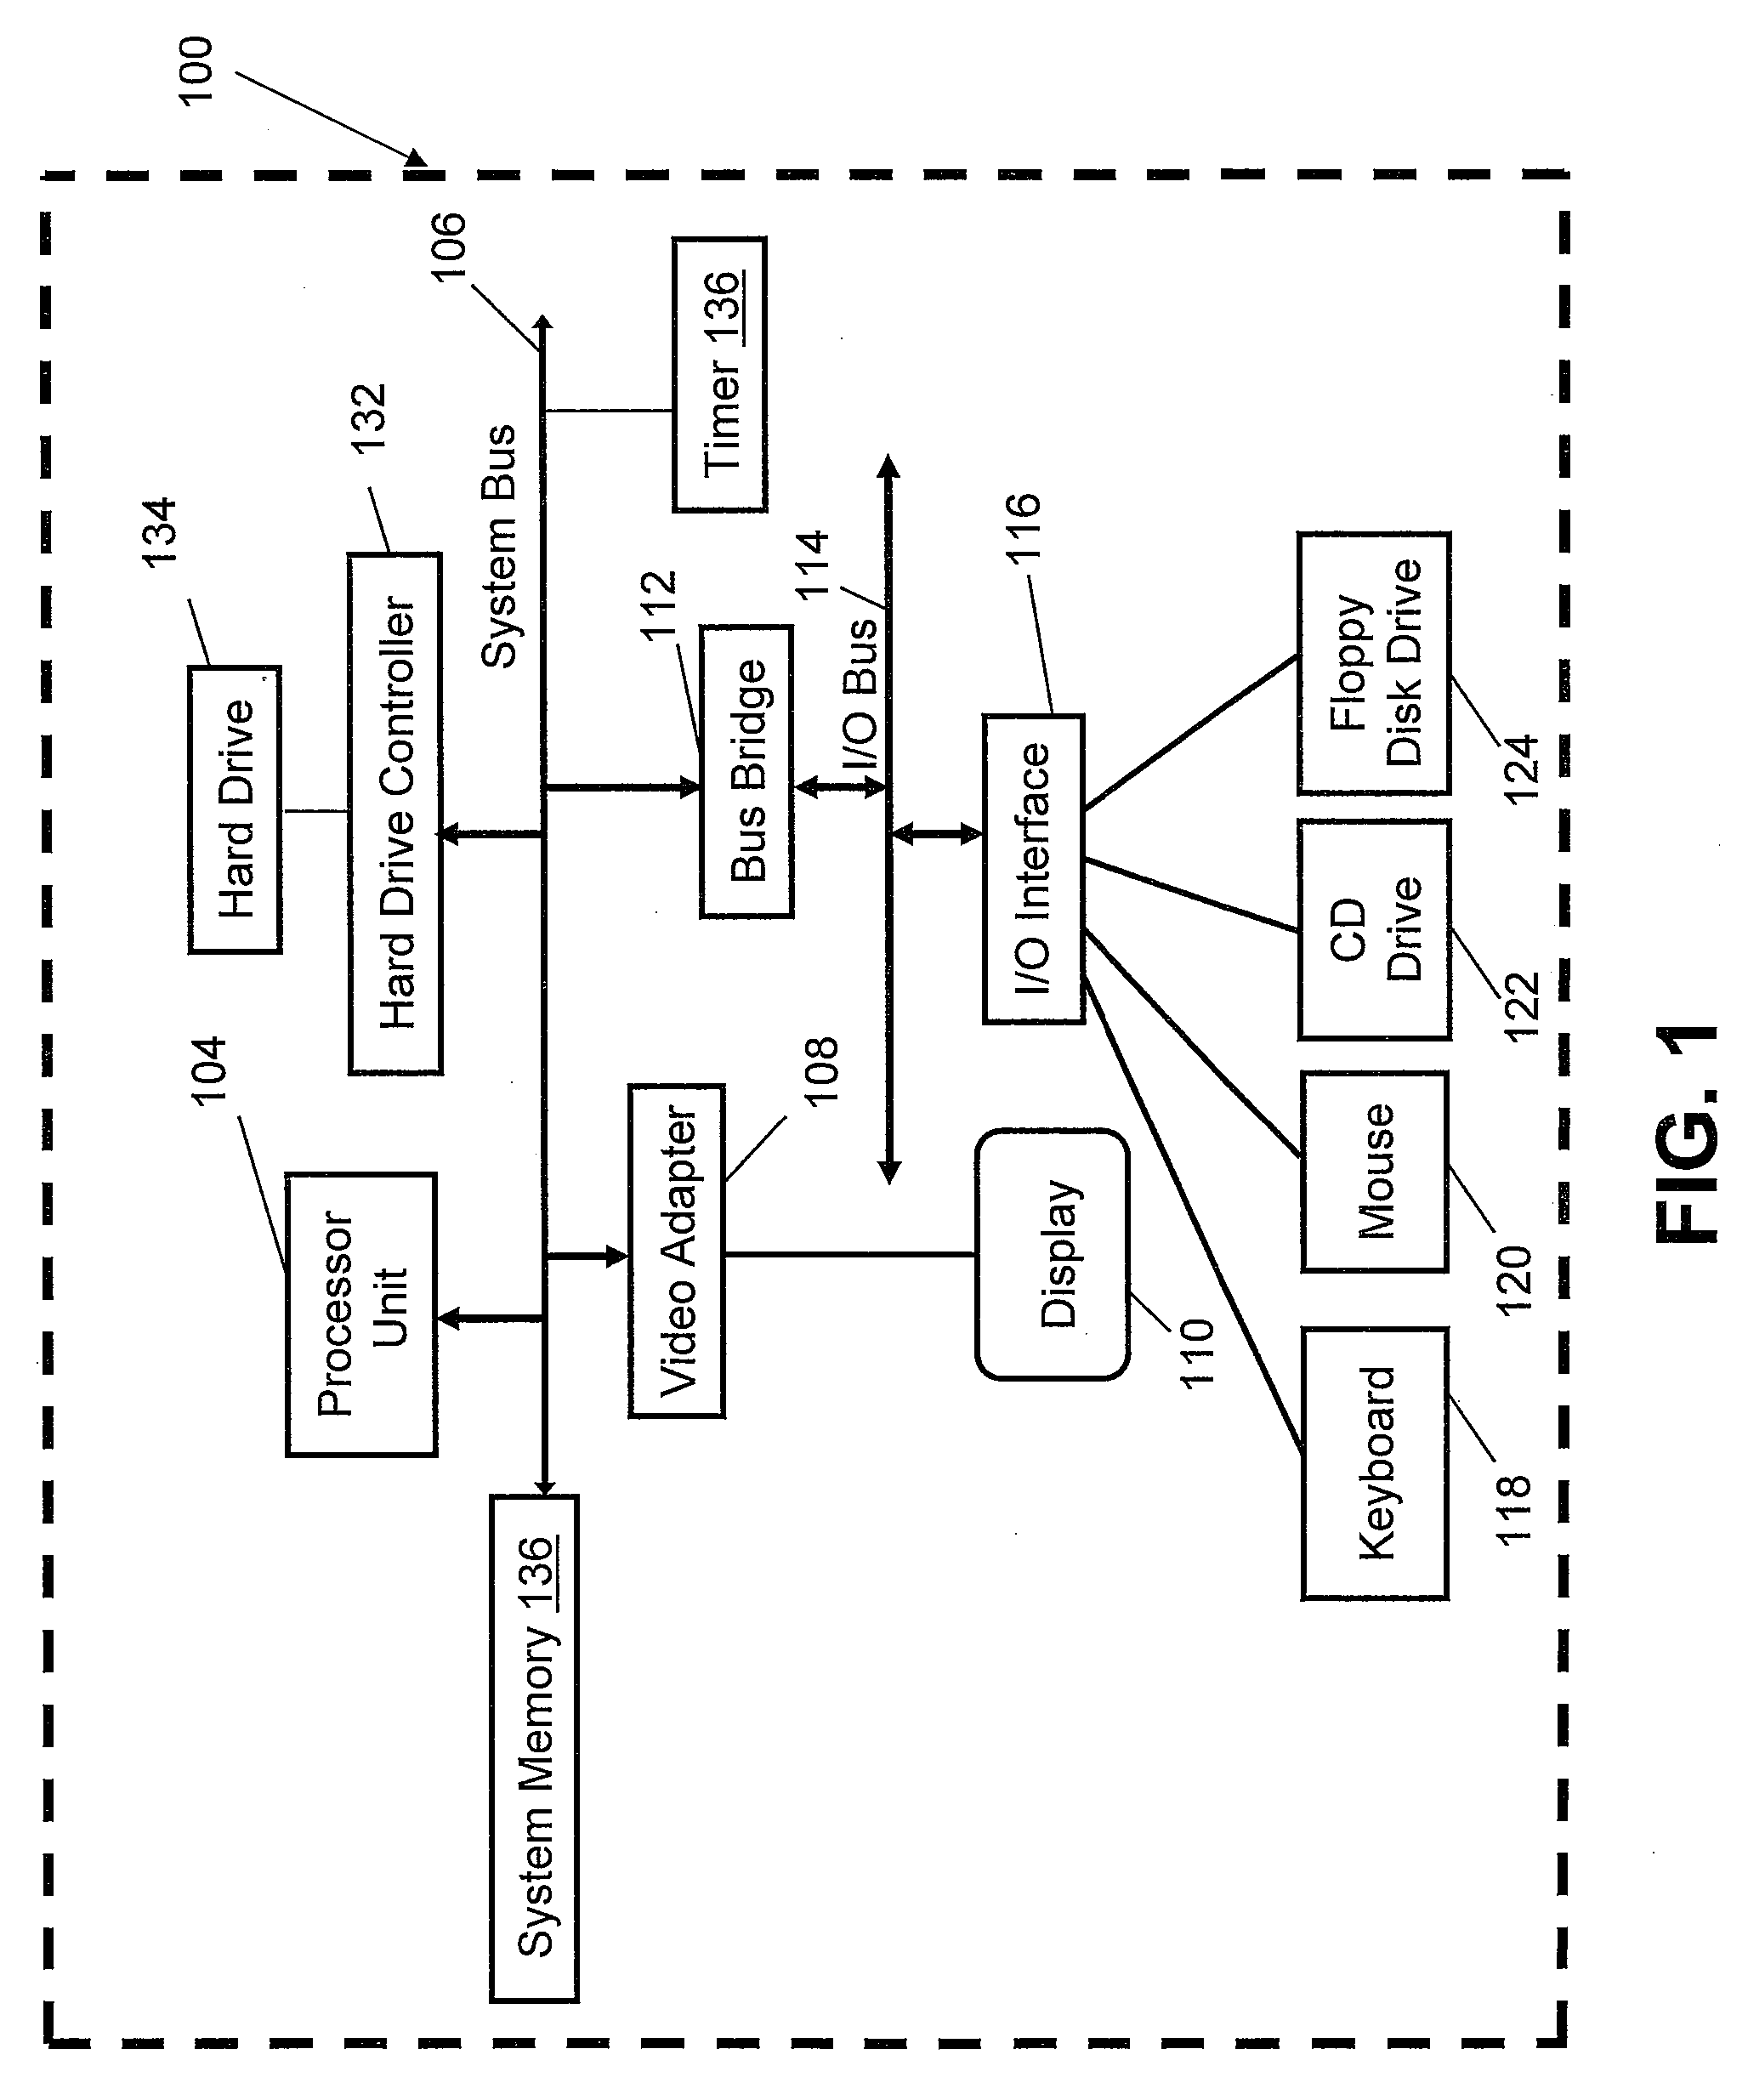 Method and Apparatus for Adjusting Sleep Time of Fixed High-Priority Threads